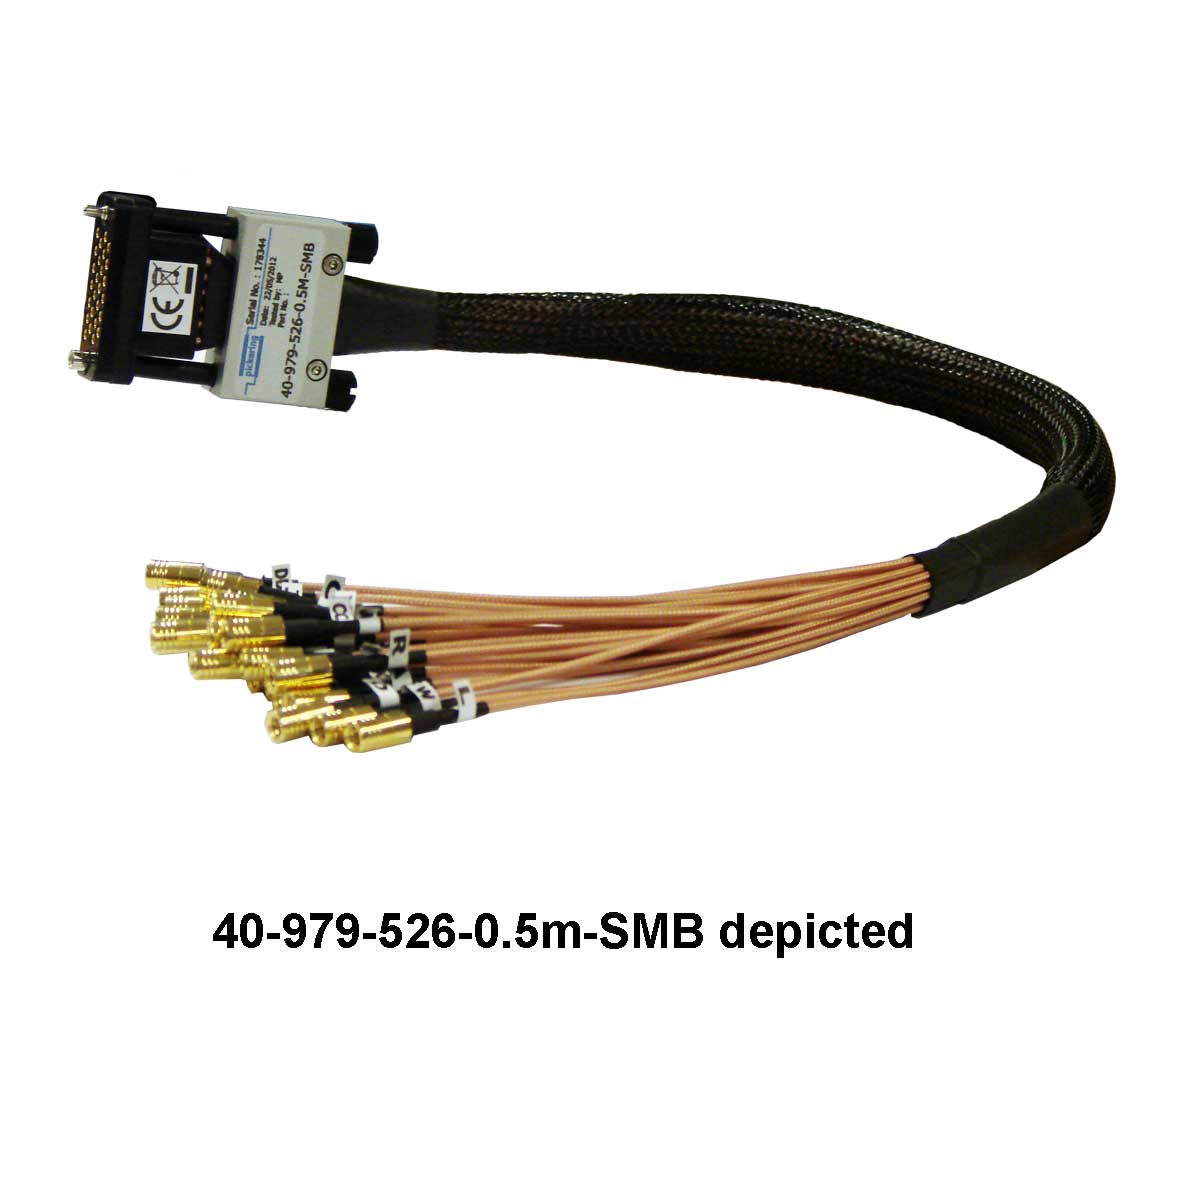 MS-M RF Connector to SMB Cable